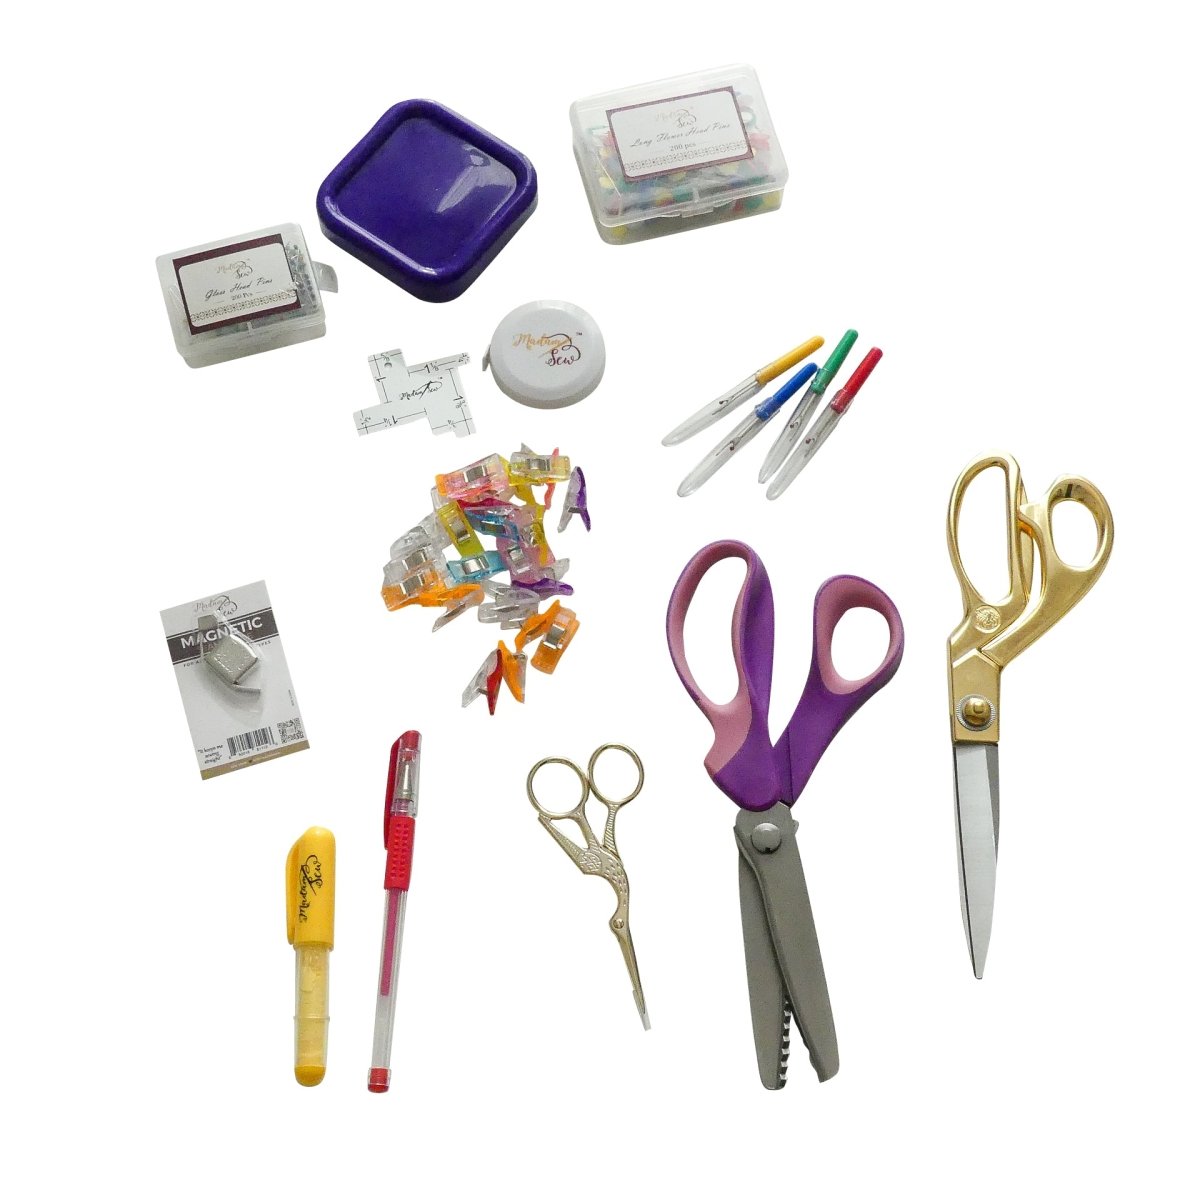 All sewing tools that come with the basic sewing tools box by Madam Sew